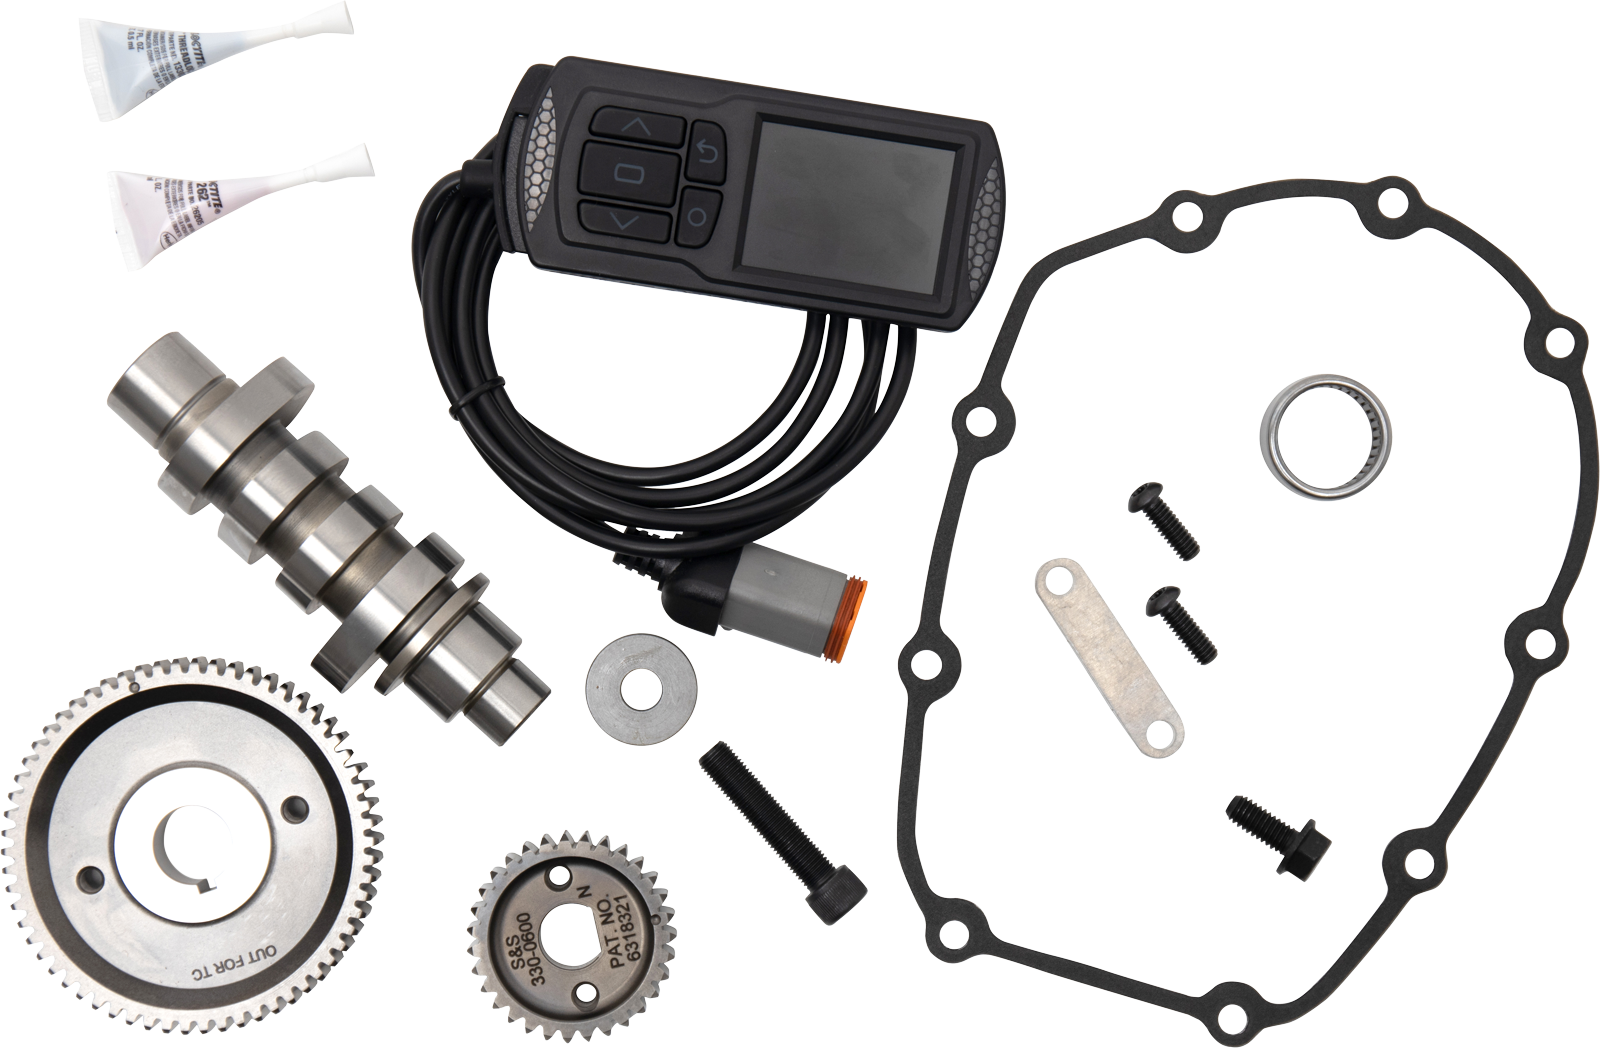 S&S Cycle (330-0726) 475 Camshaft and Dynojet PV-3 Cam Kit - 475G - Gear Drive  for 2017-2019 M8 Harley Touring Models